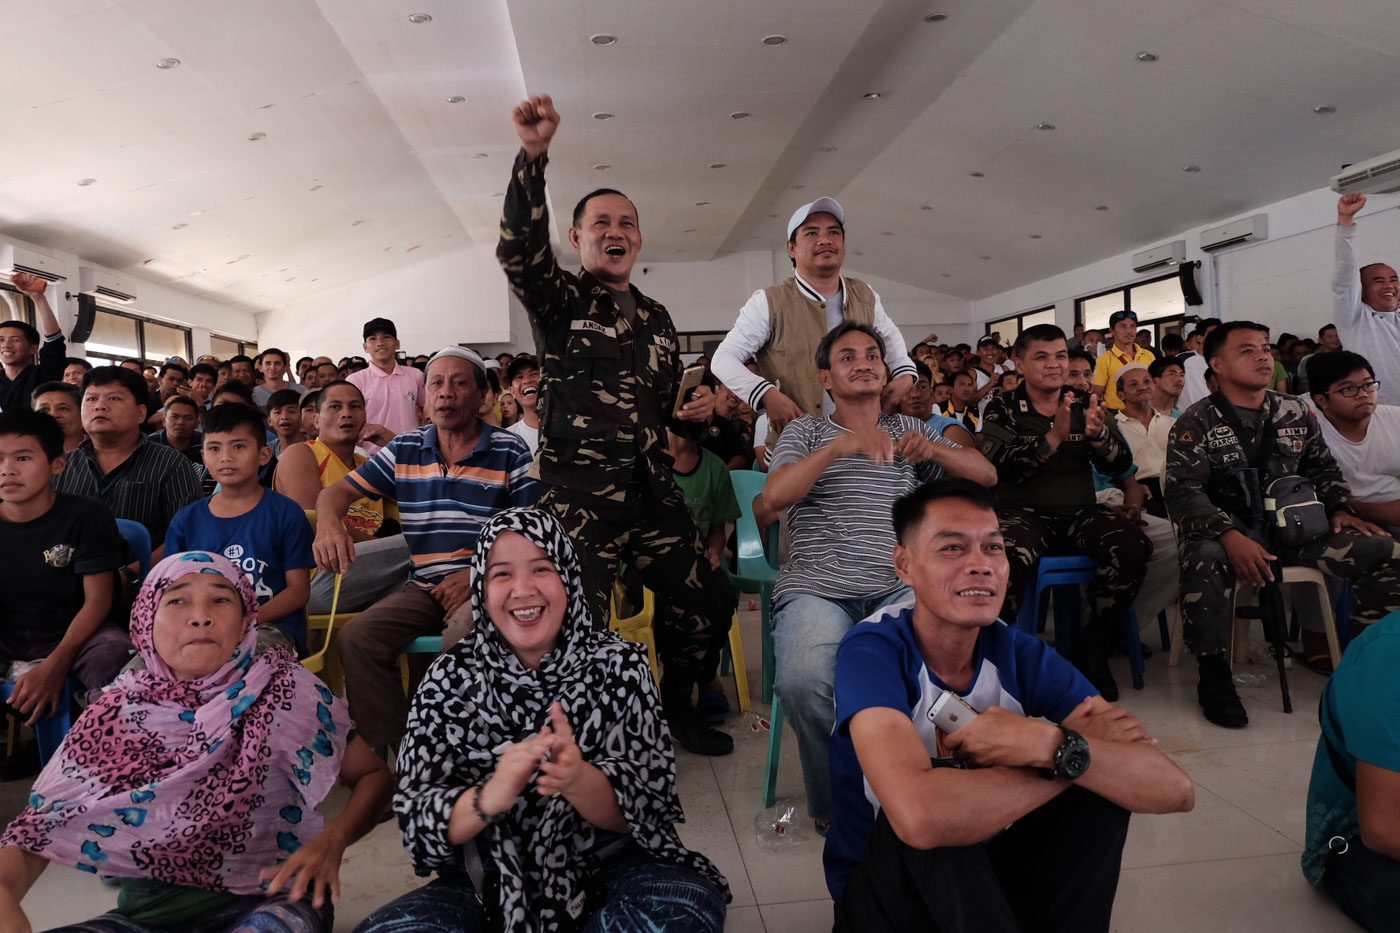 RESPITE. Residents of Marawi City and soldiers react each time Manny Pacquiao lands a punch on Jeff Horn as they watch the fight in the Lanao del Sur provincial capitol in Marawi City on July 2, 2017. Photo by Bobby Lagsa/Rappler   